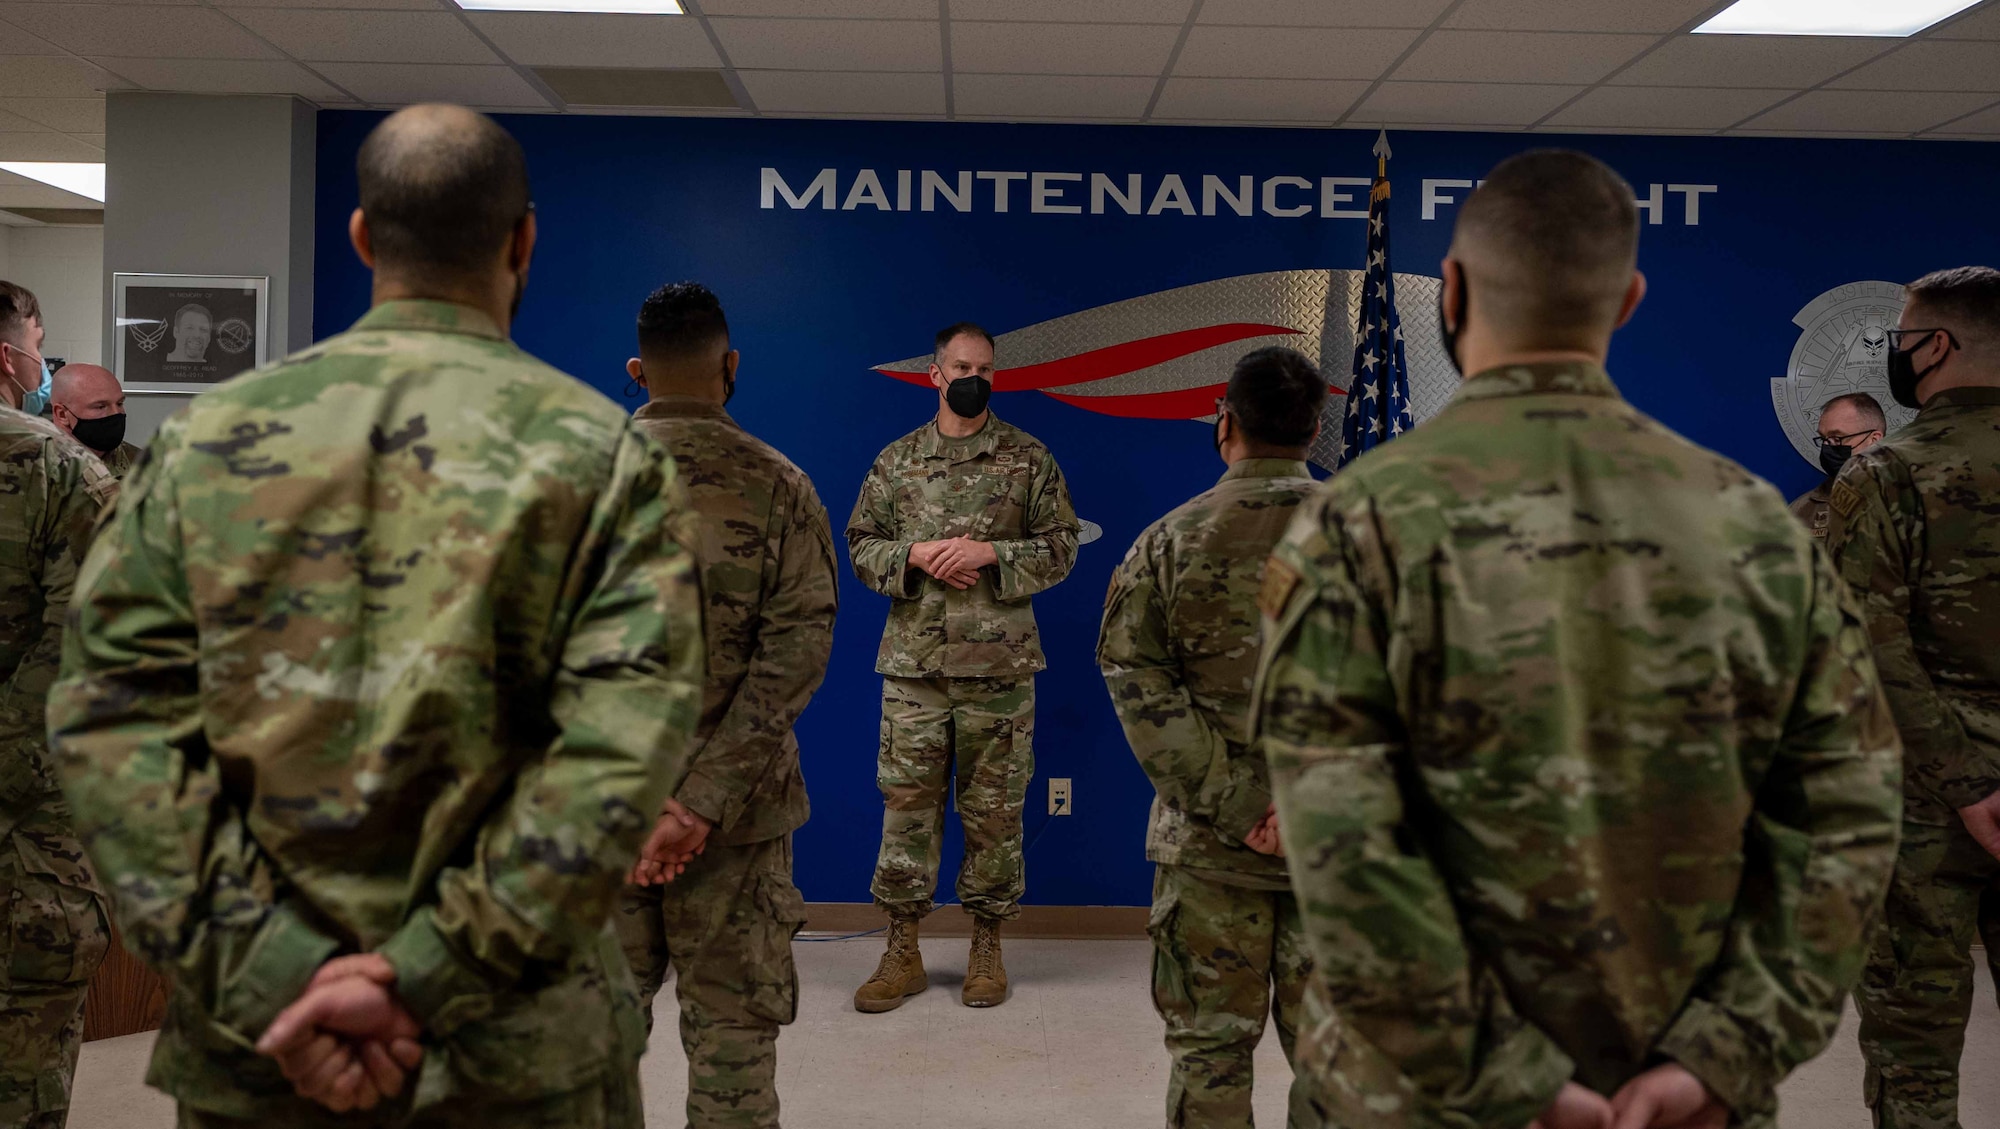 Col. Matt Husemann, 436th Airlift Wing commander, speaks to members of the 436th Maintenance Squadron, Operating Location Alpha, during an all call at Westover Air Reserve Base, Massachusetts, Jan. 25, 2022. During the event, Husemann and Chief Master Sgt. Tim Bayes, 436th AW command chief, dis-cussed housing, readiness and Airmanship. (U.S. Air Force photo by Senior Airman Faith Schaefer)